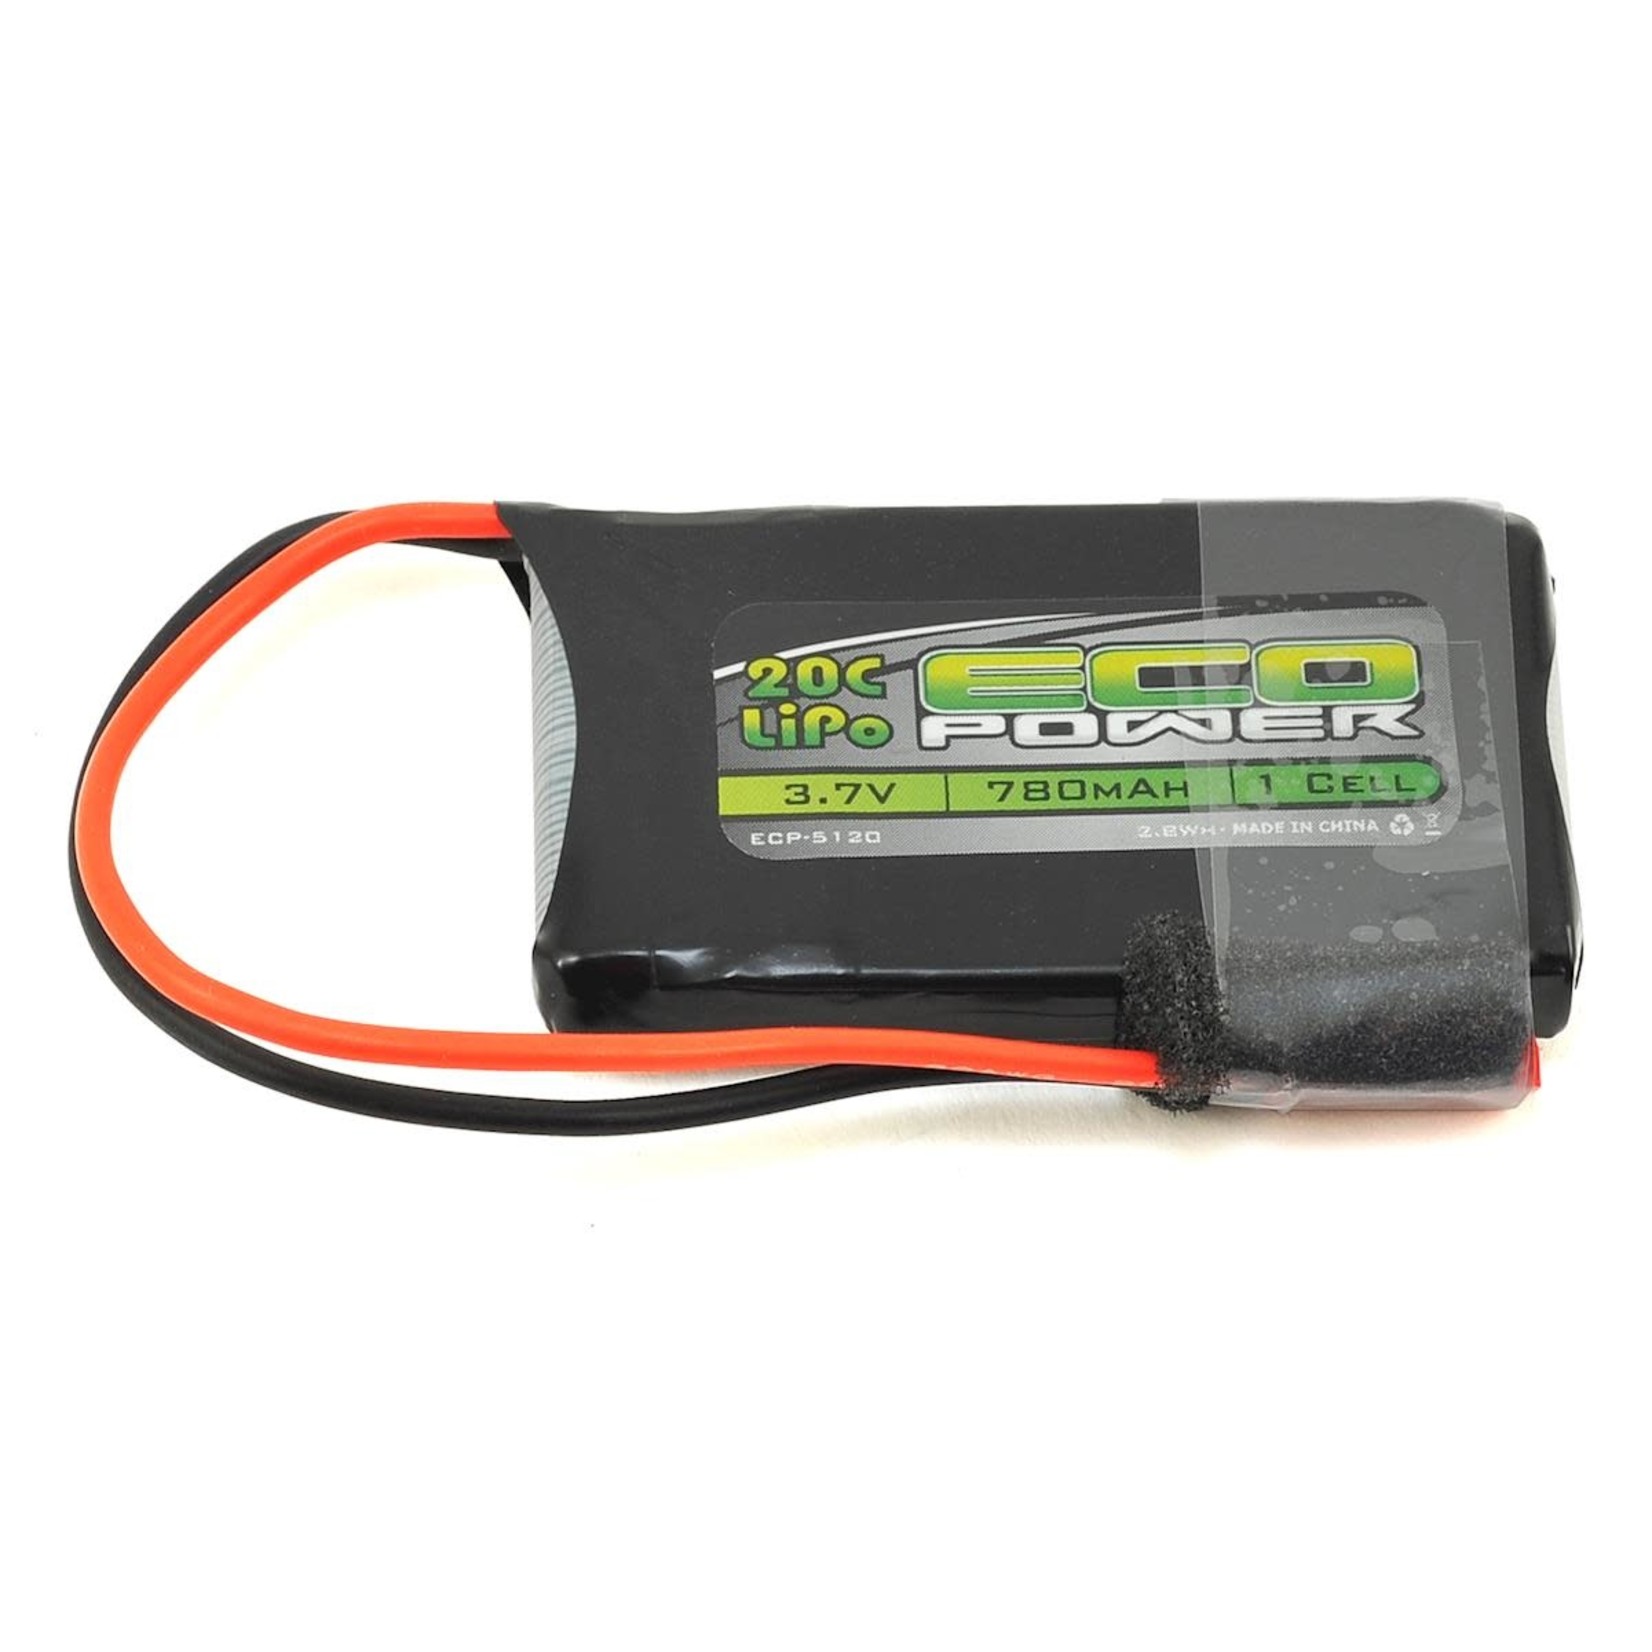 EcoPower EcoPower "Electron" 1S LiPo 20C Battery (3.7V/780mAh) w/JST Connector #ECP-5120